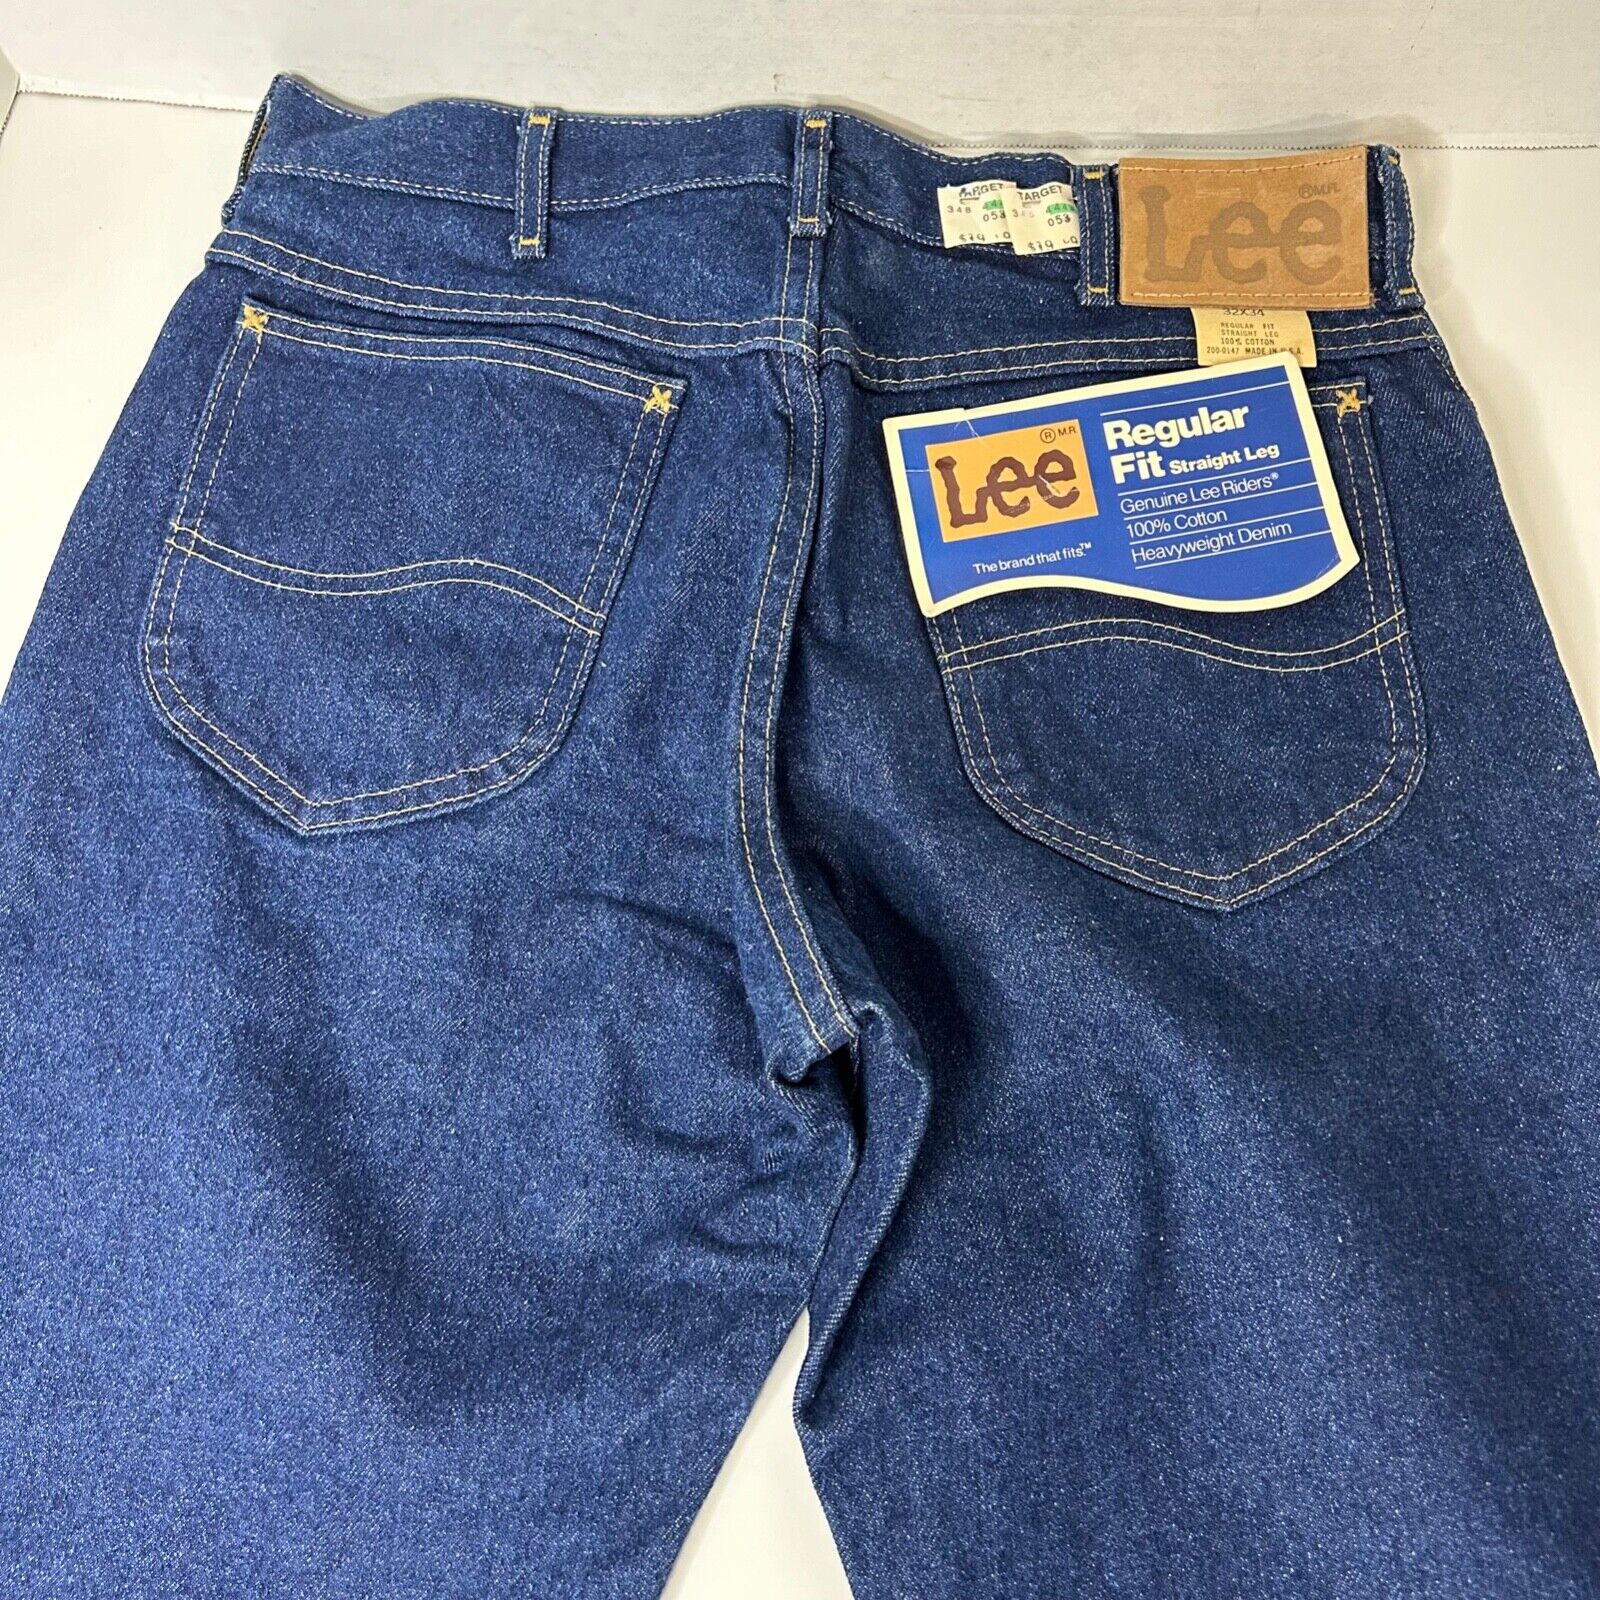 Vintage NWT 70s Lee Rider Jeans Size 32x34 Regular Fit Heavyweight Straight Leg